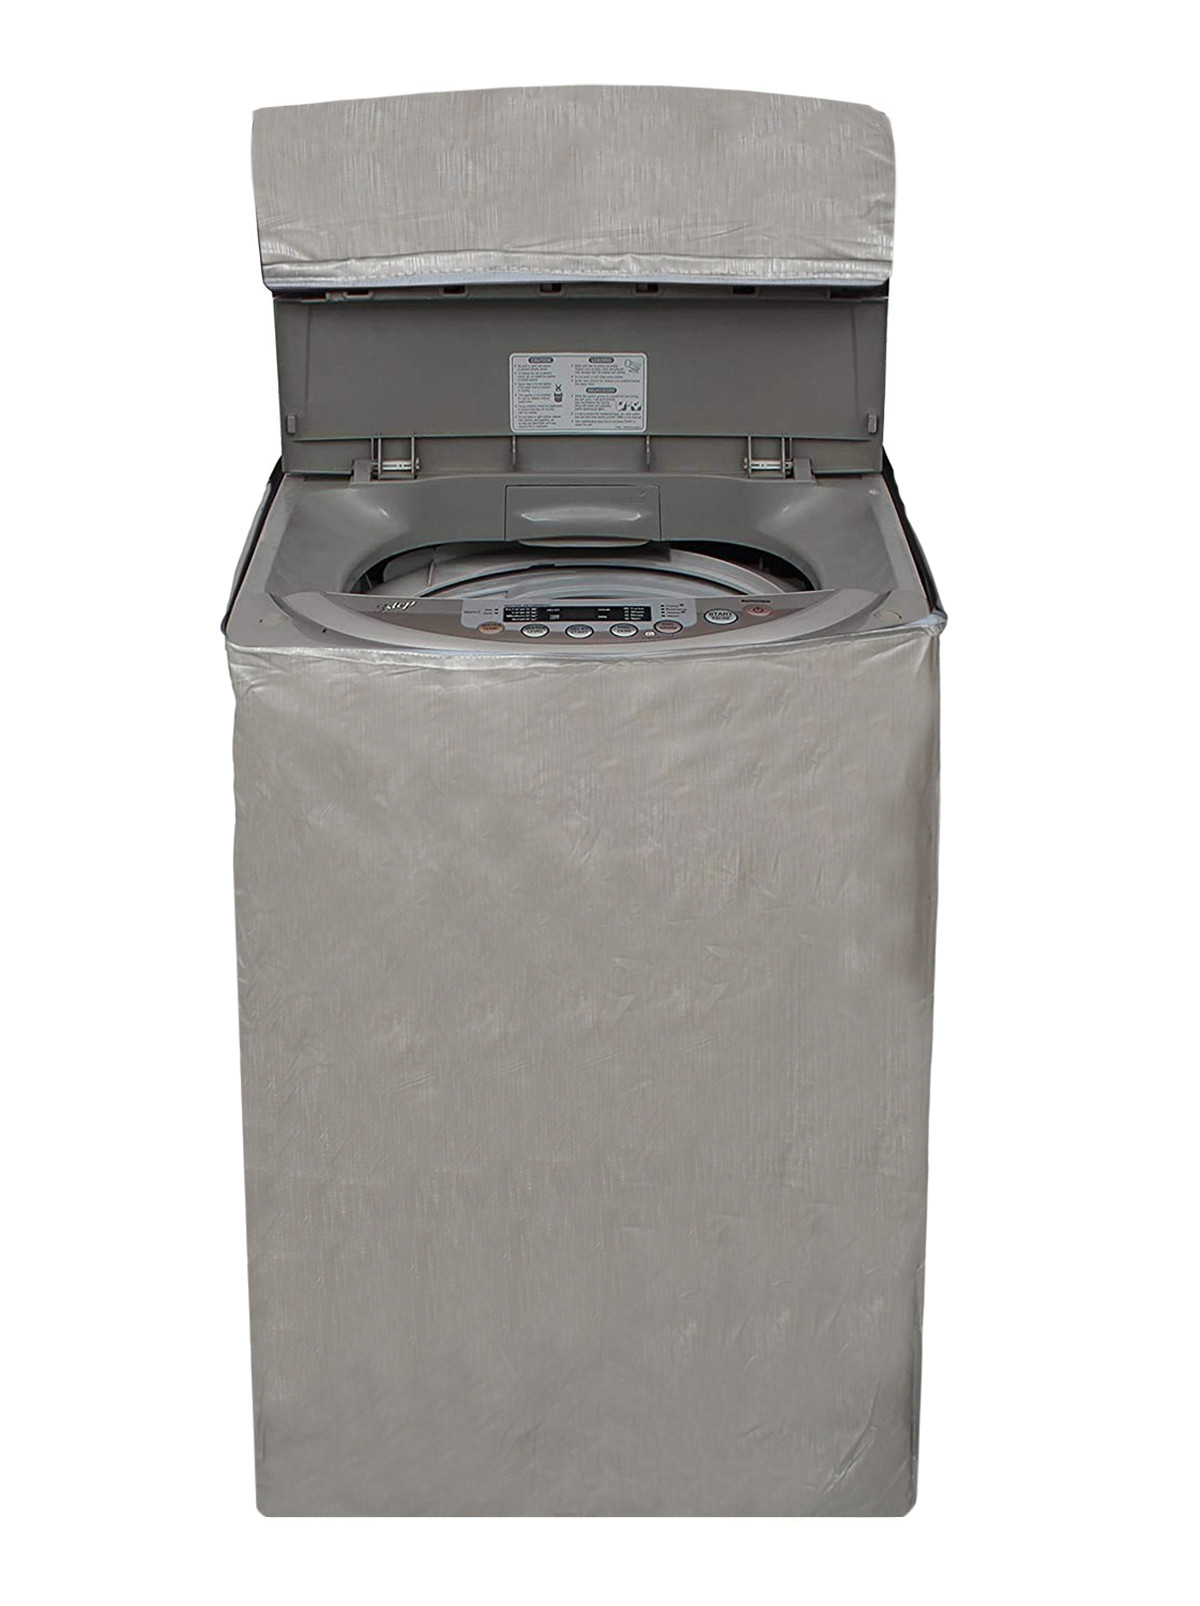 Kuber Industries Water Proof Dust Proof PVC Top Load Washing Machine Cover (Grey)-HS43KUBMART26745